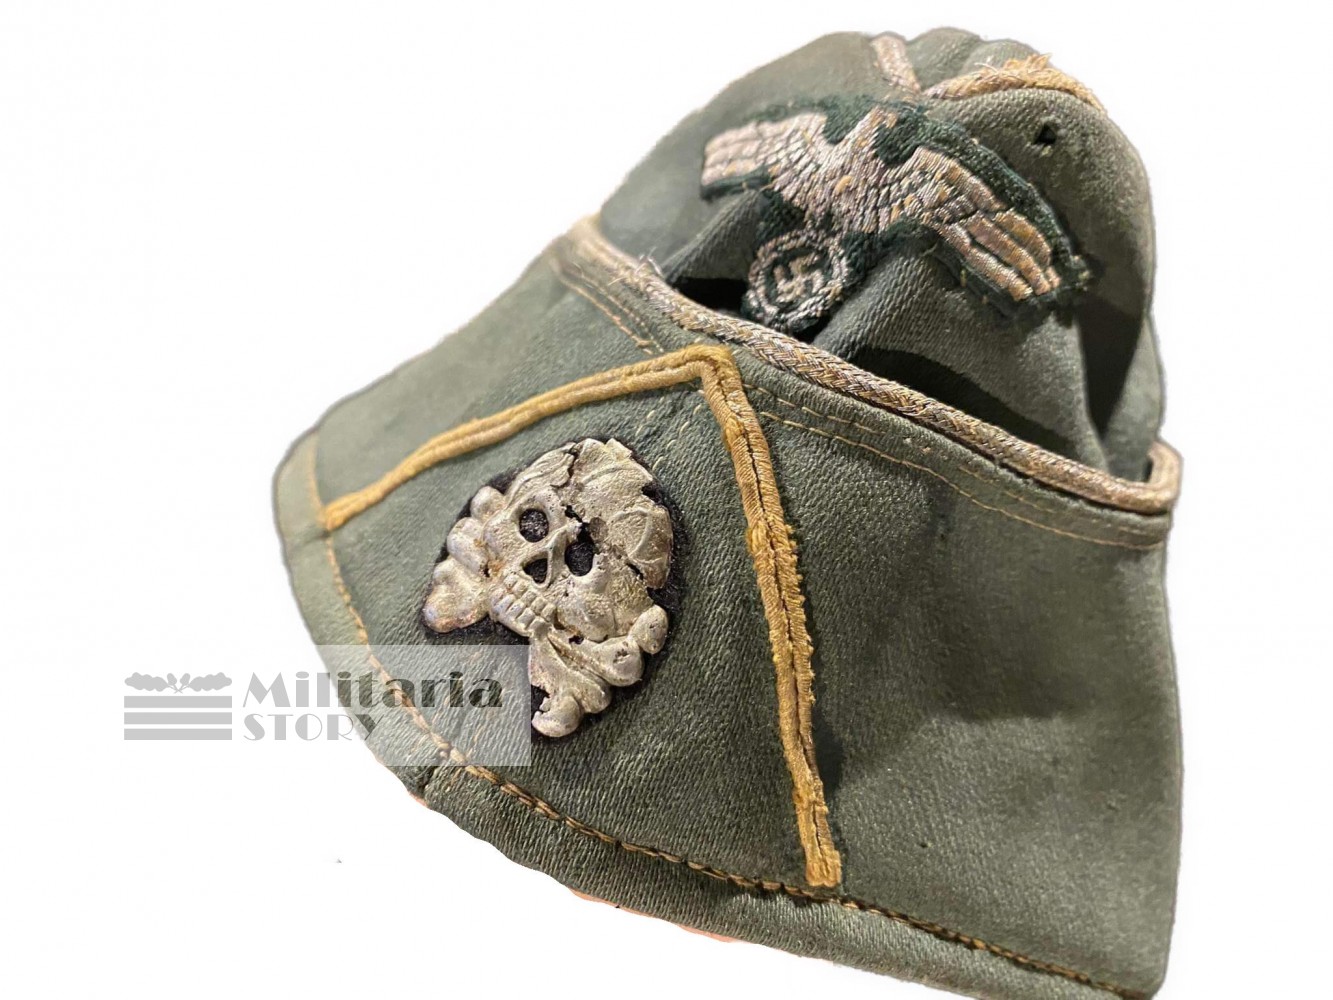 Untouched Waffen SS Officer side cap - Untouched Waffen SS Officer side cap: Vintage German Headgear